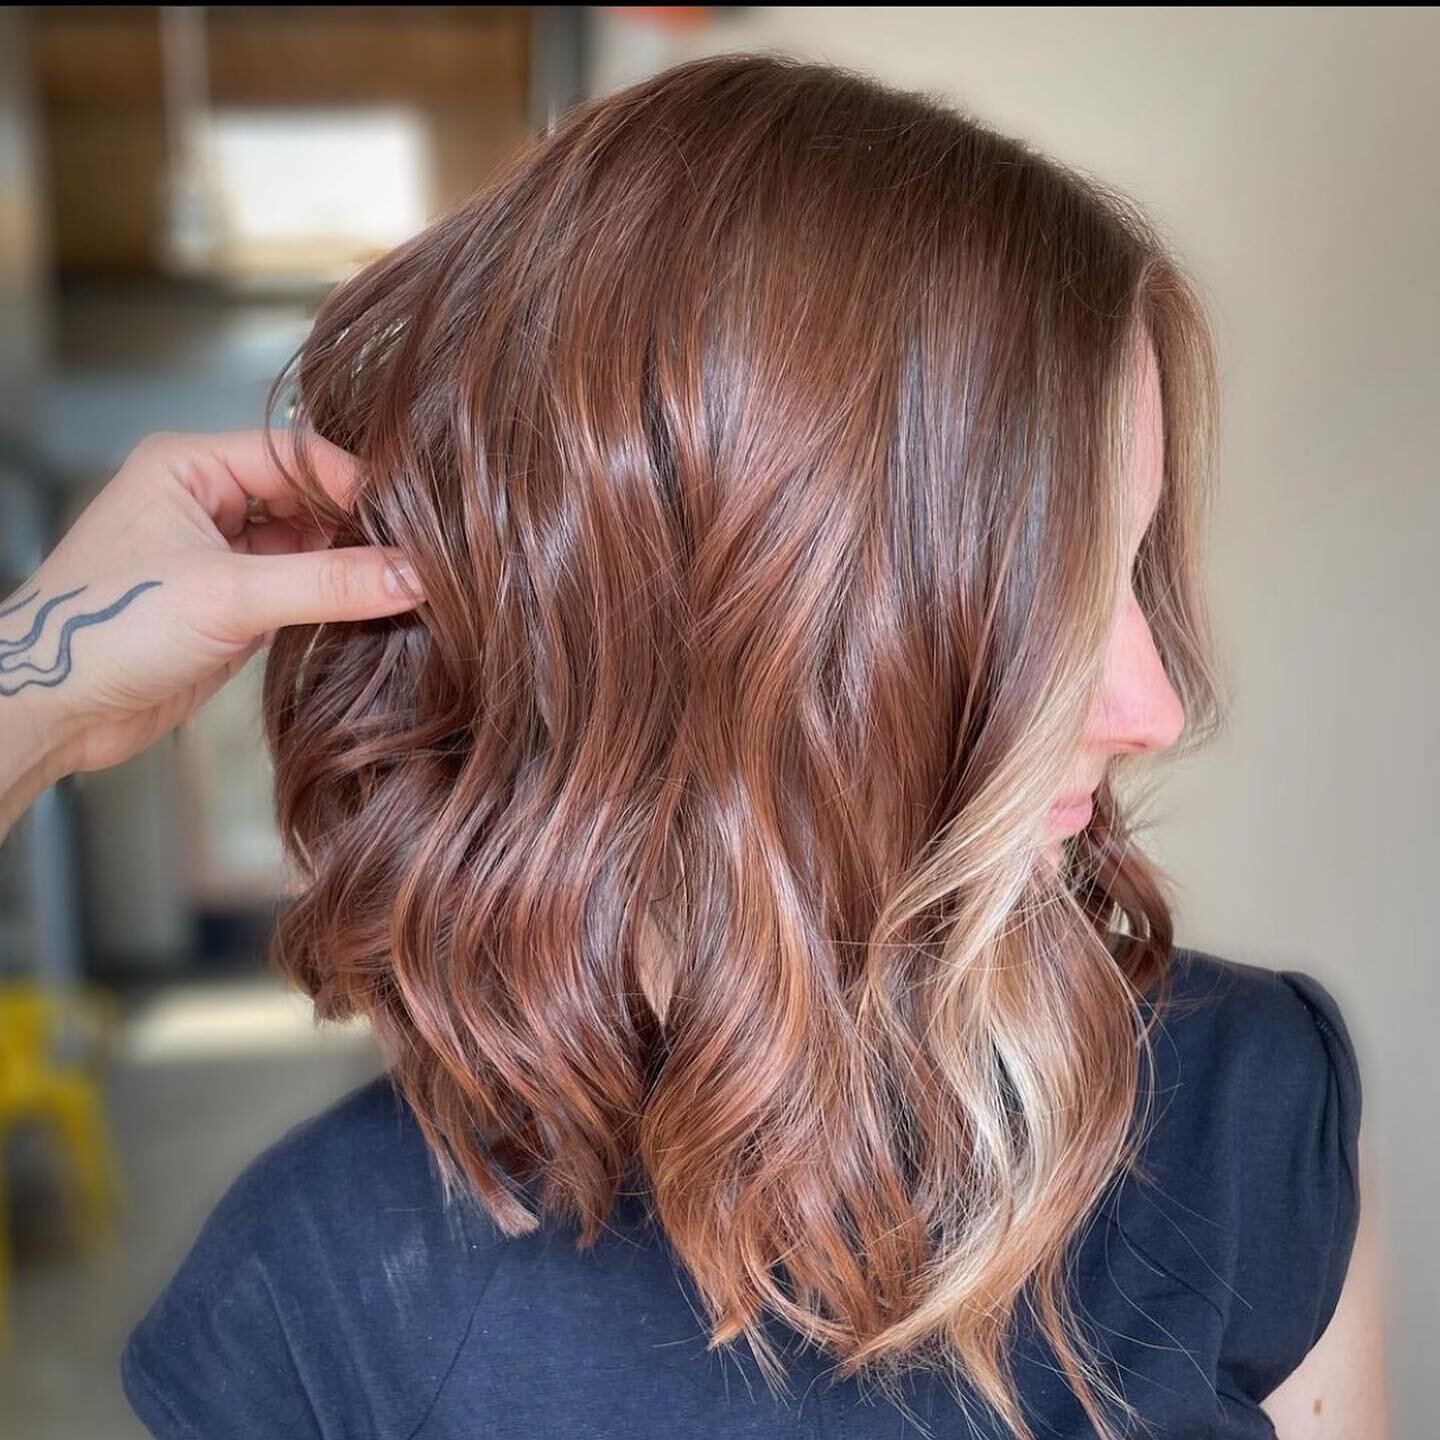 Hairs by @hairbykaytaro 
.
.
.

One of my favorite clients sat in my chair the other day! Marisa calls this her &quot;chameleon hair&quot; because it changes and looks good every way in every lighting or setting! I love any opportunity to do a copper